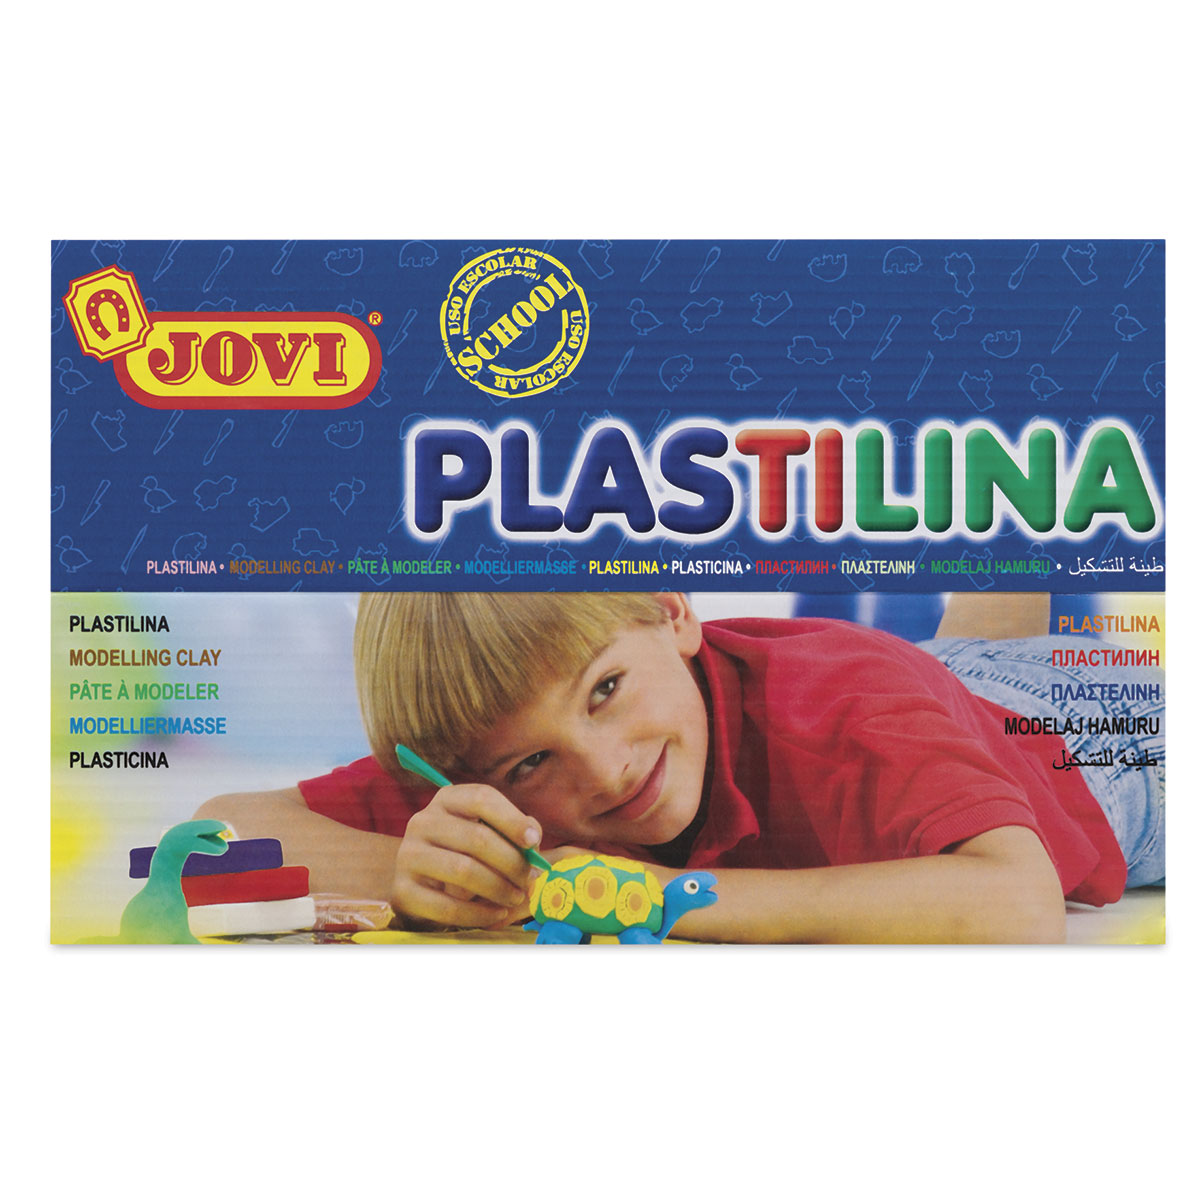 Plastilina Modeling Clay, 10 Colors, 180g - BCI Imaging Supplies